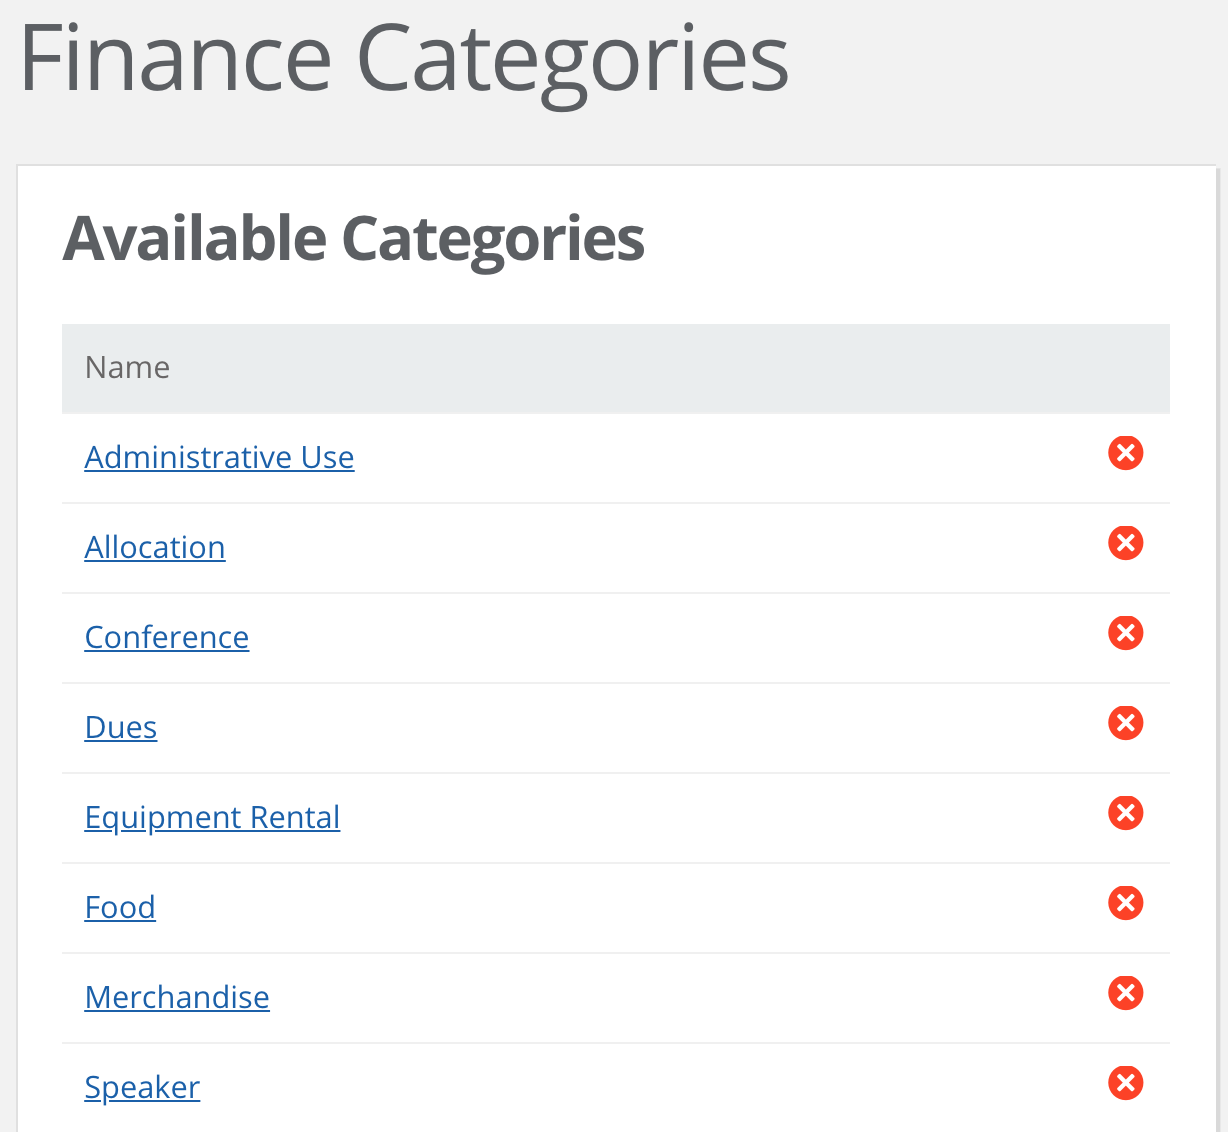 The image shows example Finance Categories, such as Food and Travel.